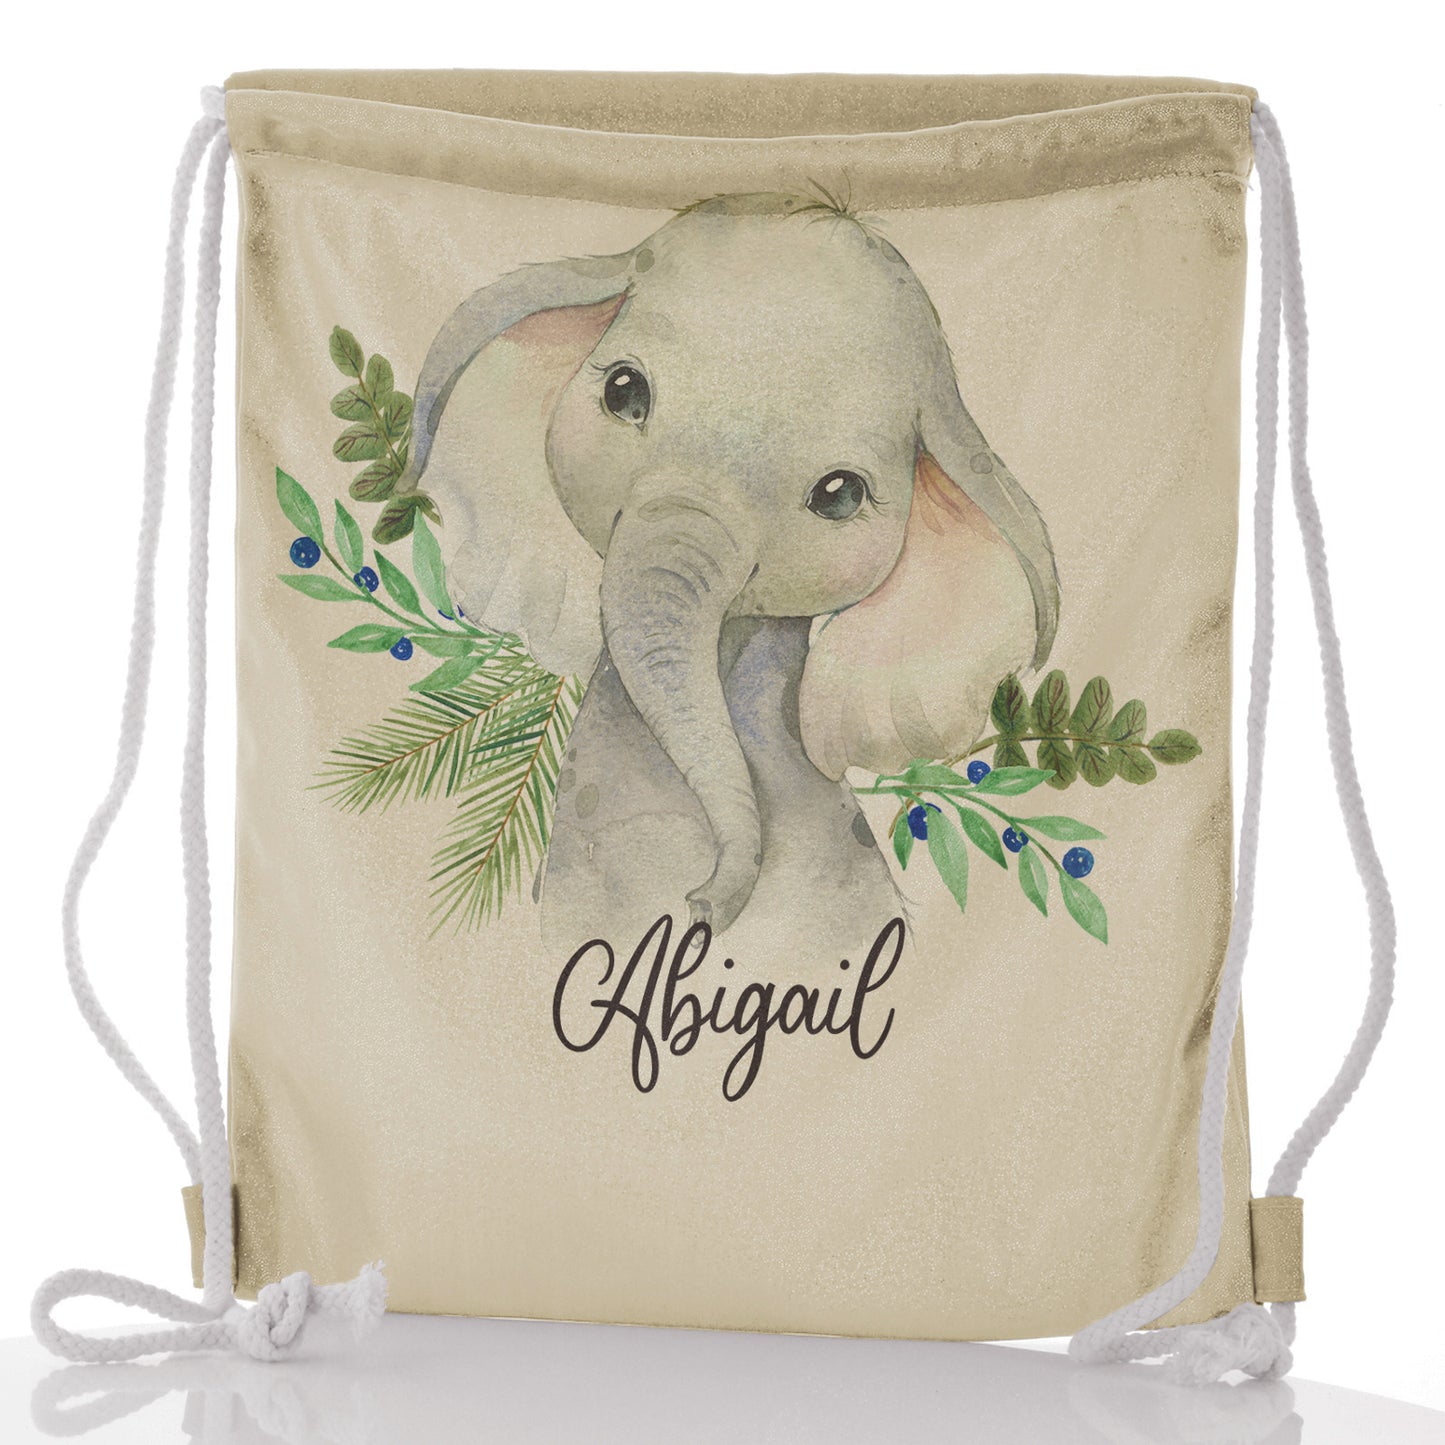 Personalised Glitter Drawstring Backpack with Elephant Blue Berries and Cute Text